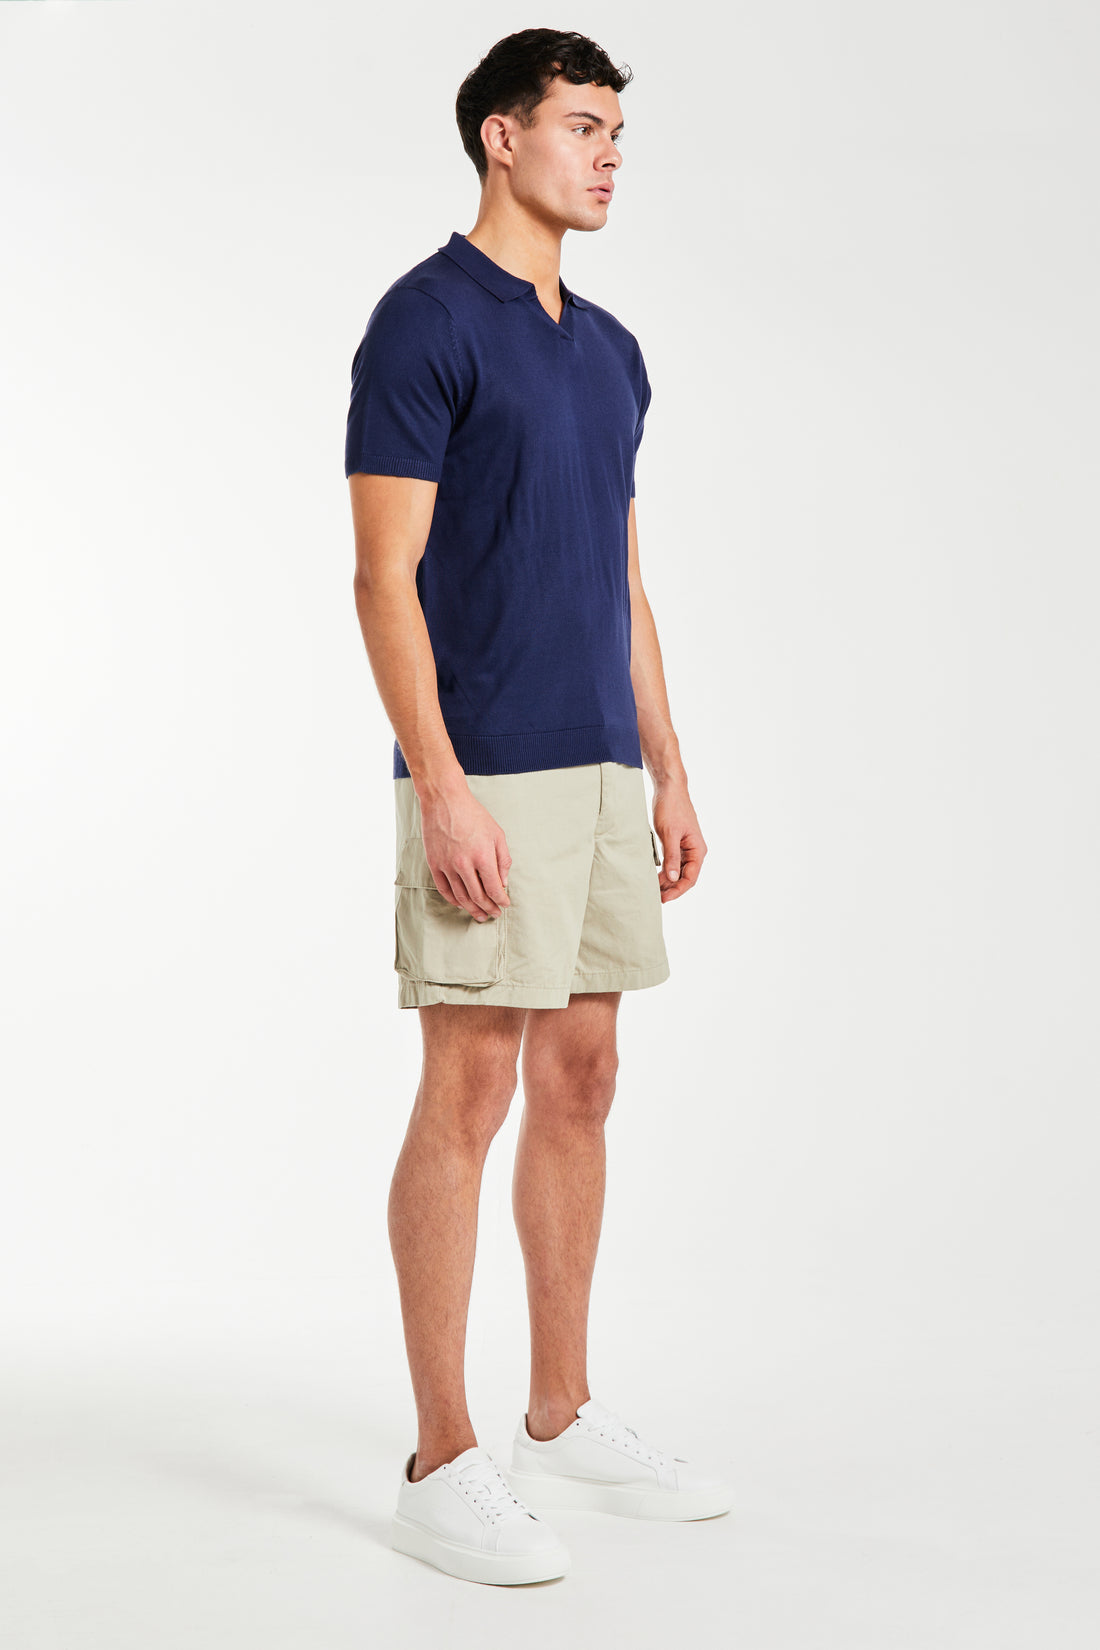 Side profile of a men's knitted polo in navy with shorts